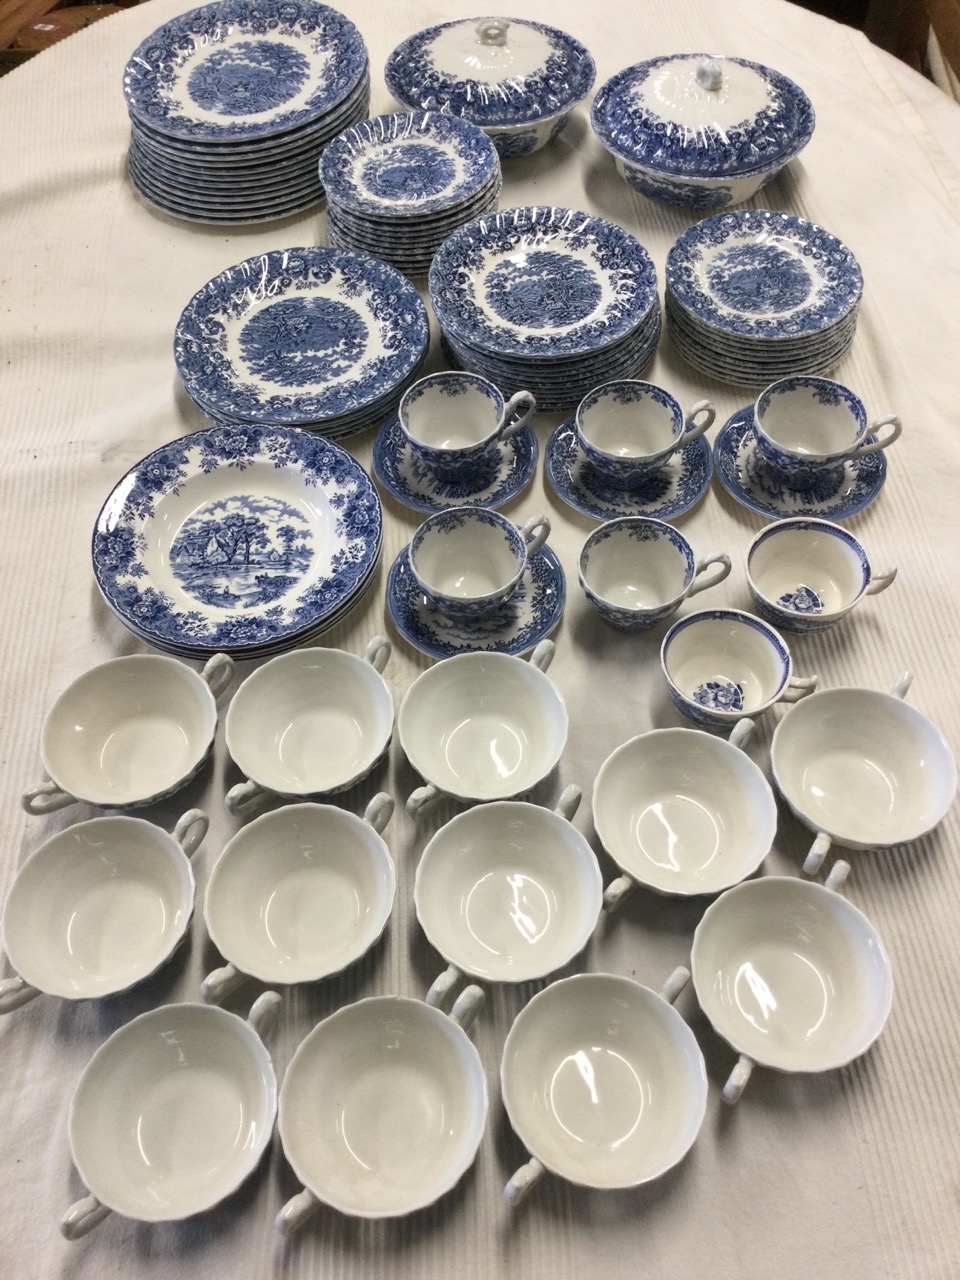 An extensive Alfred Meakin blues & white dinner/tea service decorated in the courtship pattern -